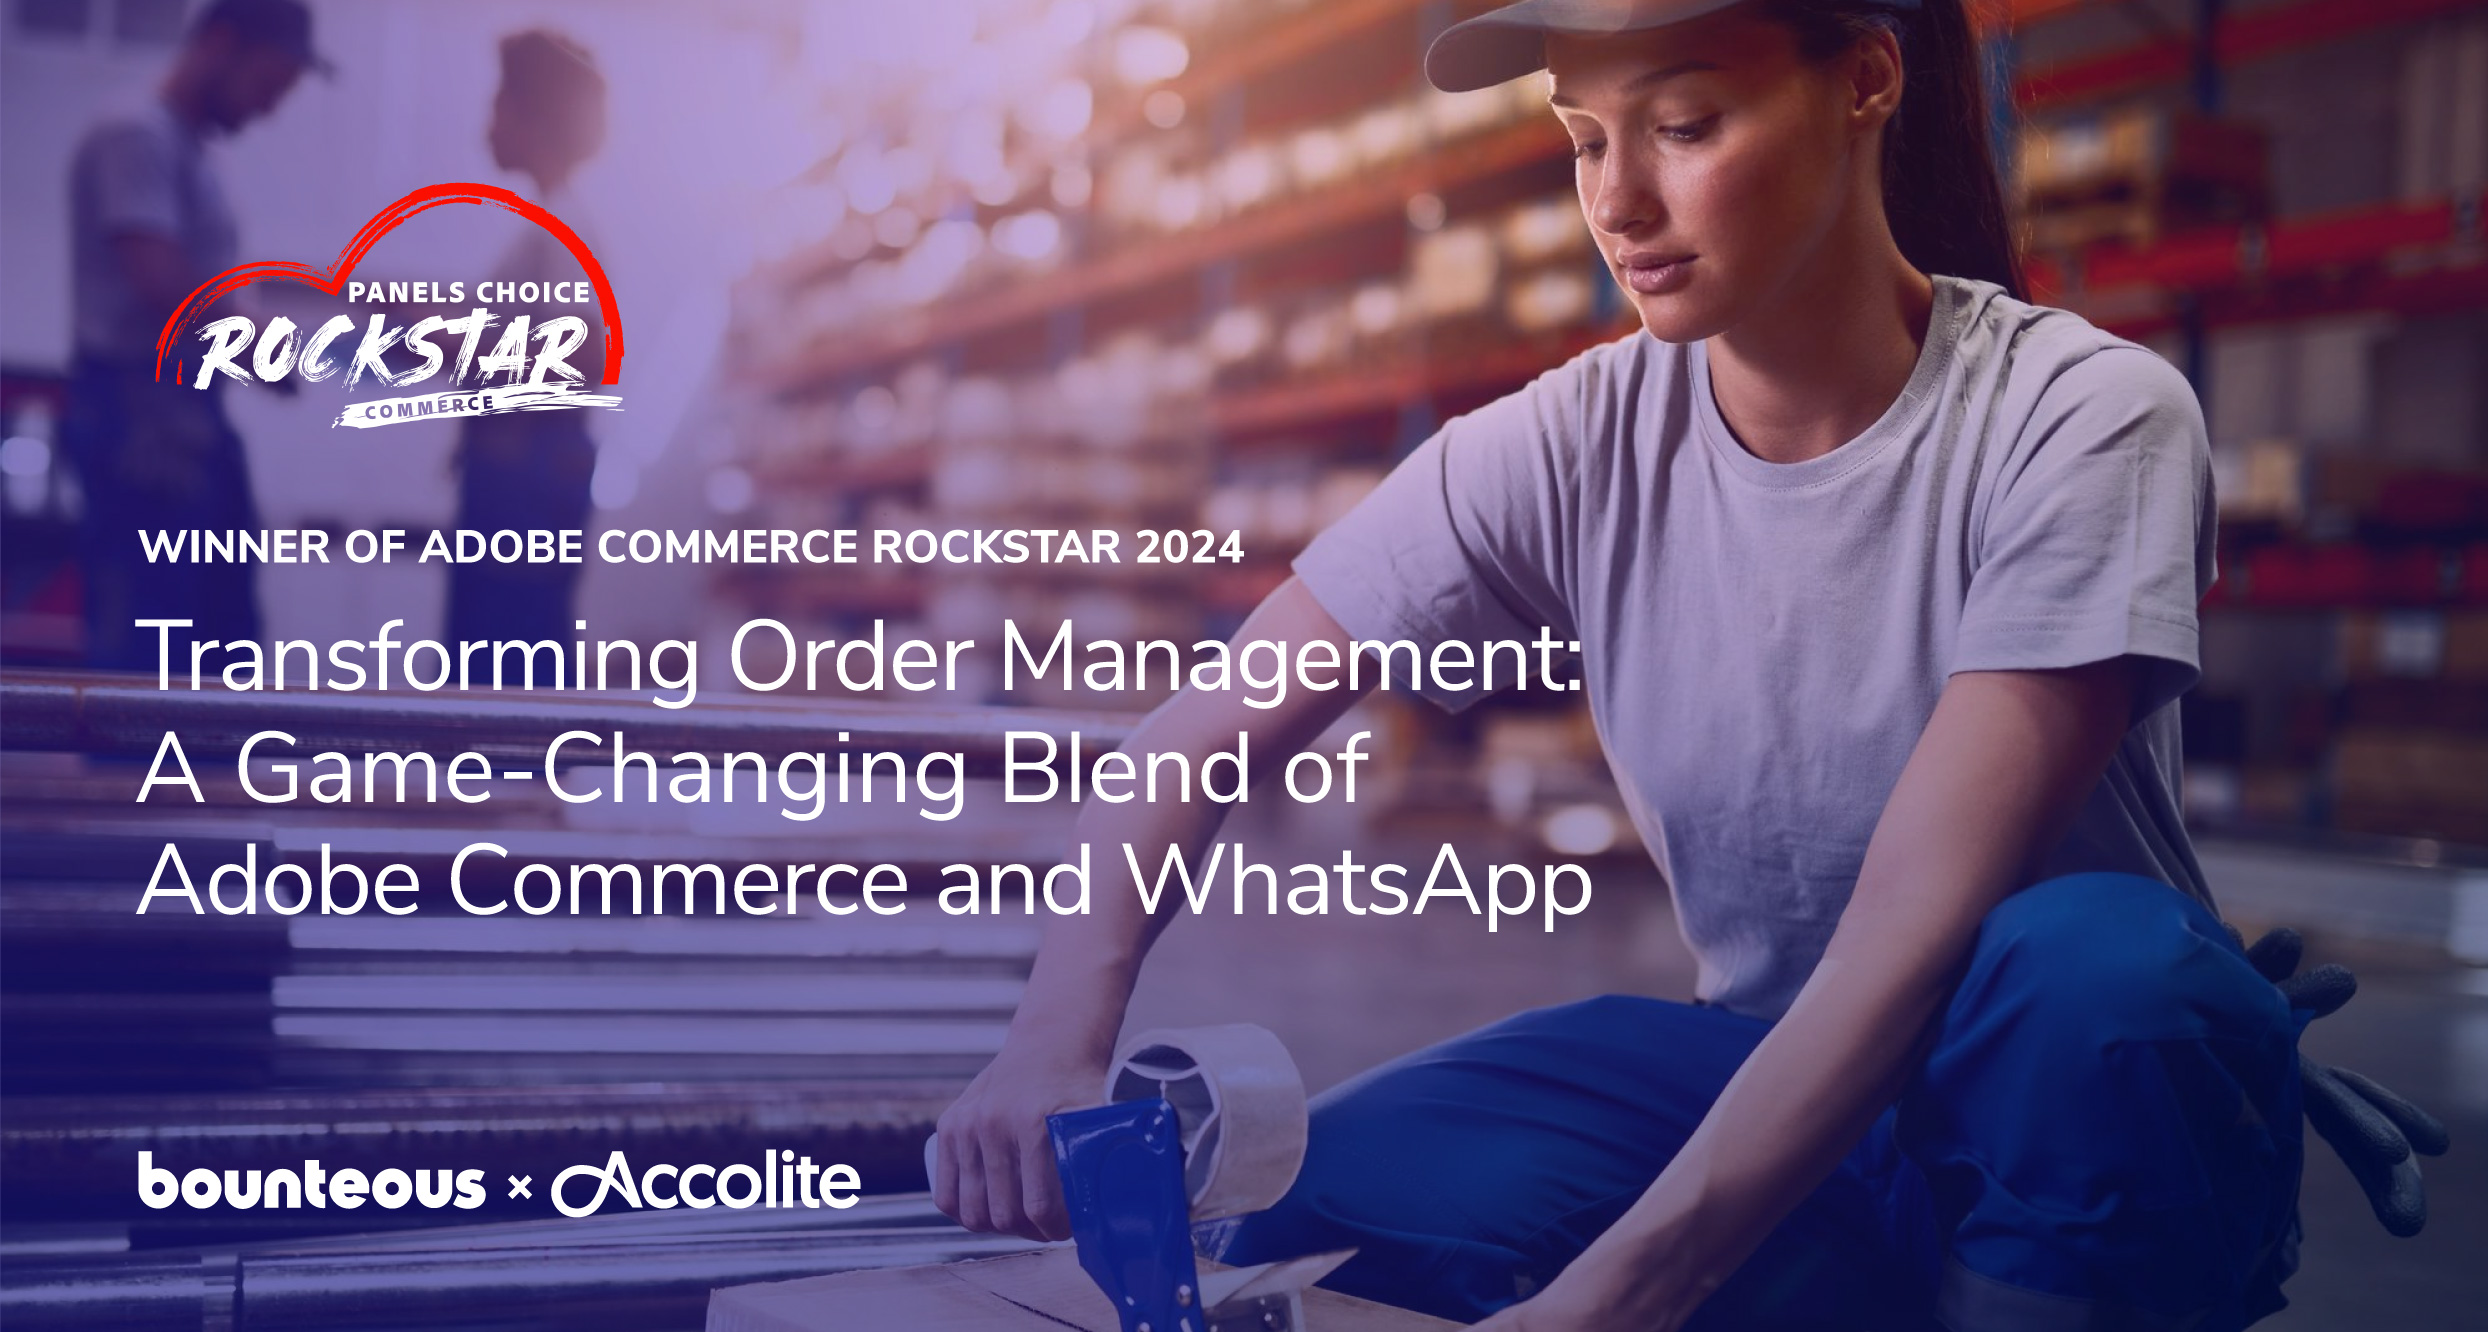 Elevating order fulfillment with a dynamic duo: Adobe Commerce + WhatsApp. 